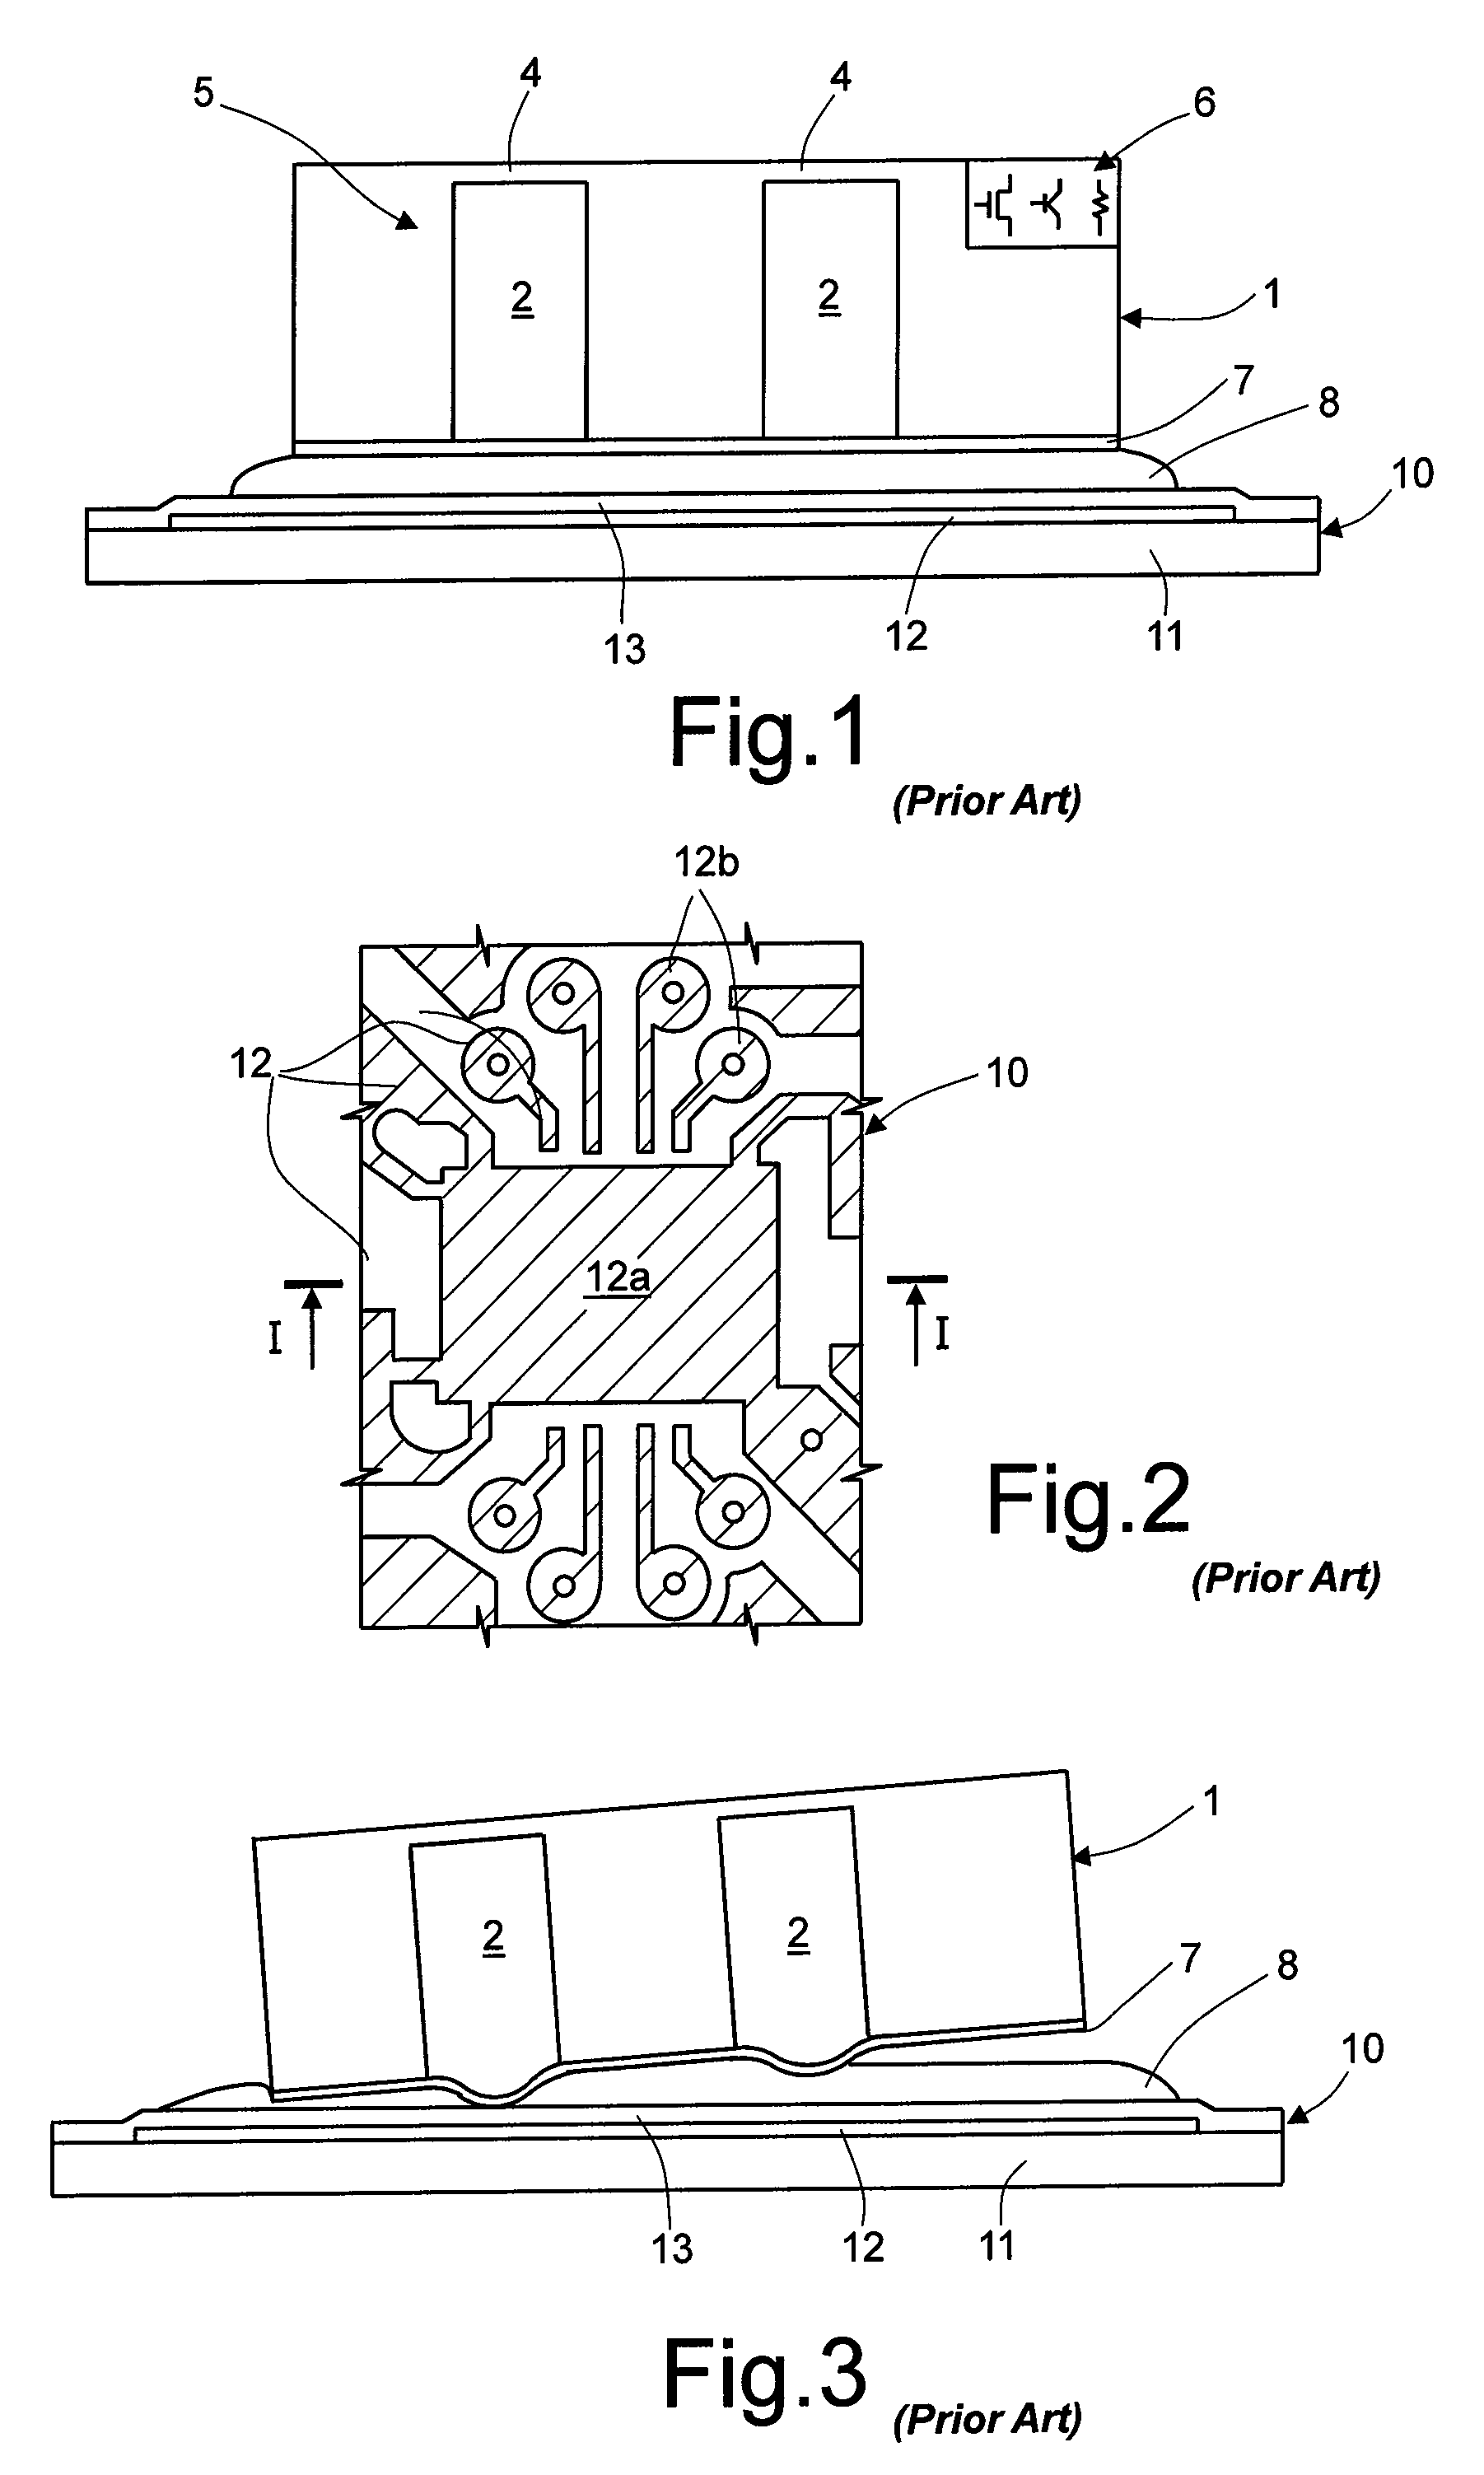 Electronic MEMS device comprising a chip bonded to a substrate and having cavities and manufacturing process thereof